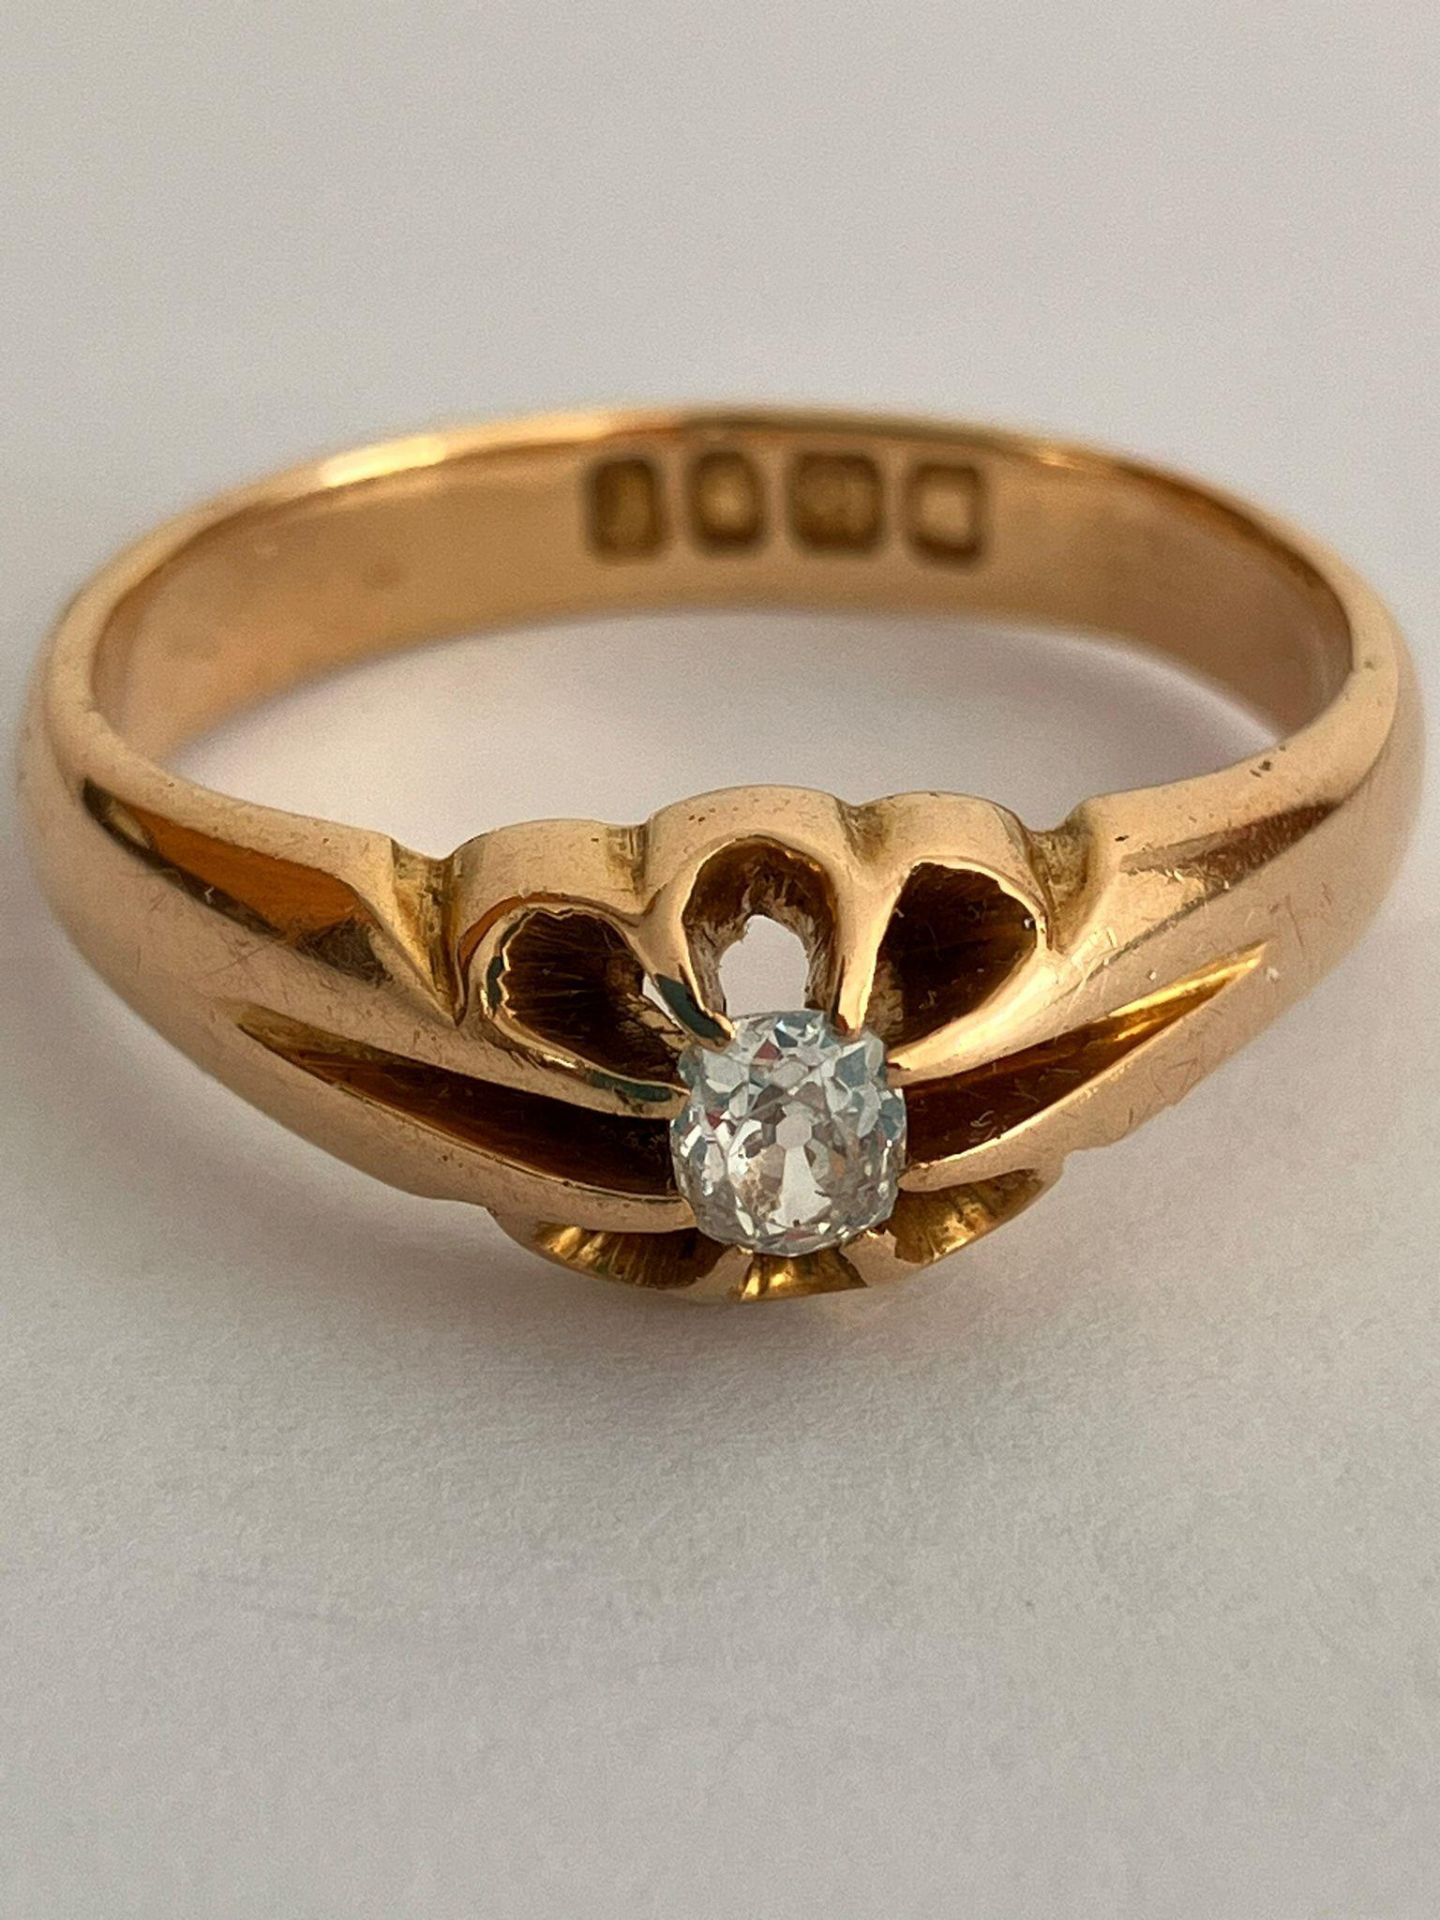 Antique 18 carat GOLD, DIAMOND SOLITAIRE GYPSY/ PINKIE RING. Having a clear white beautifully cut